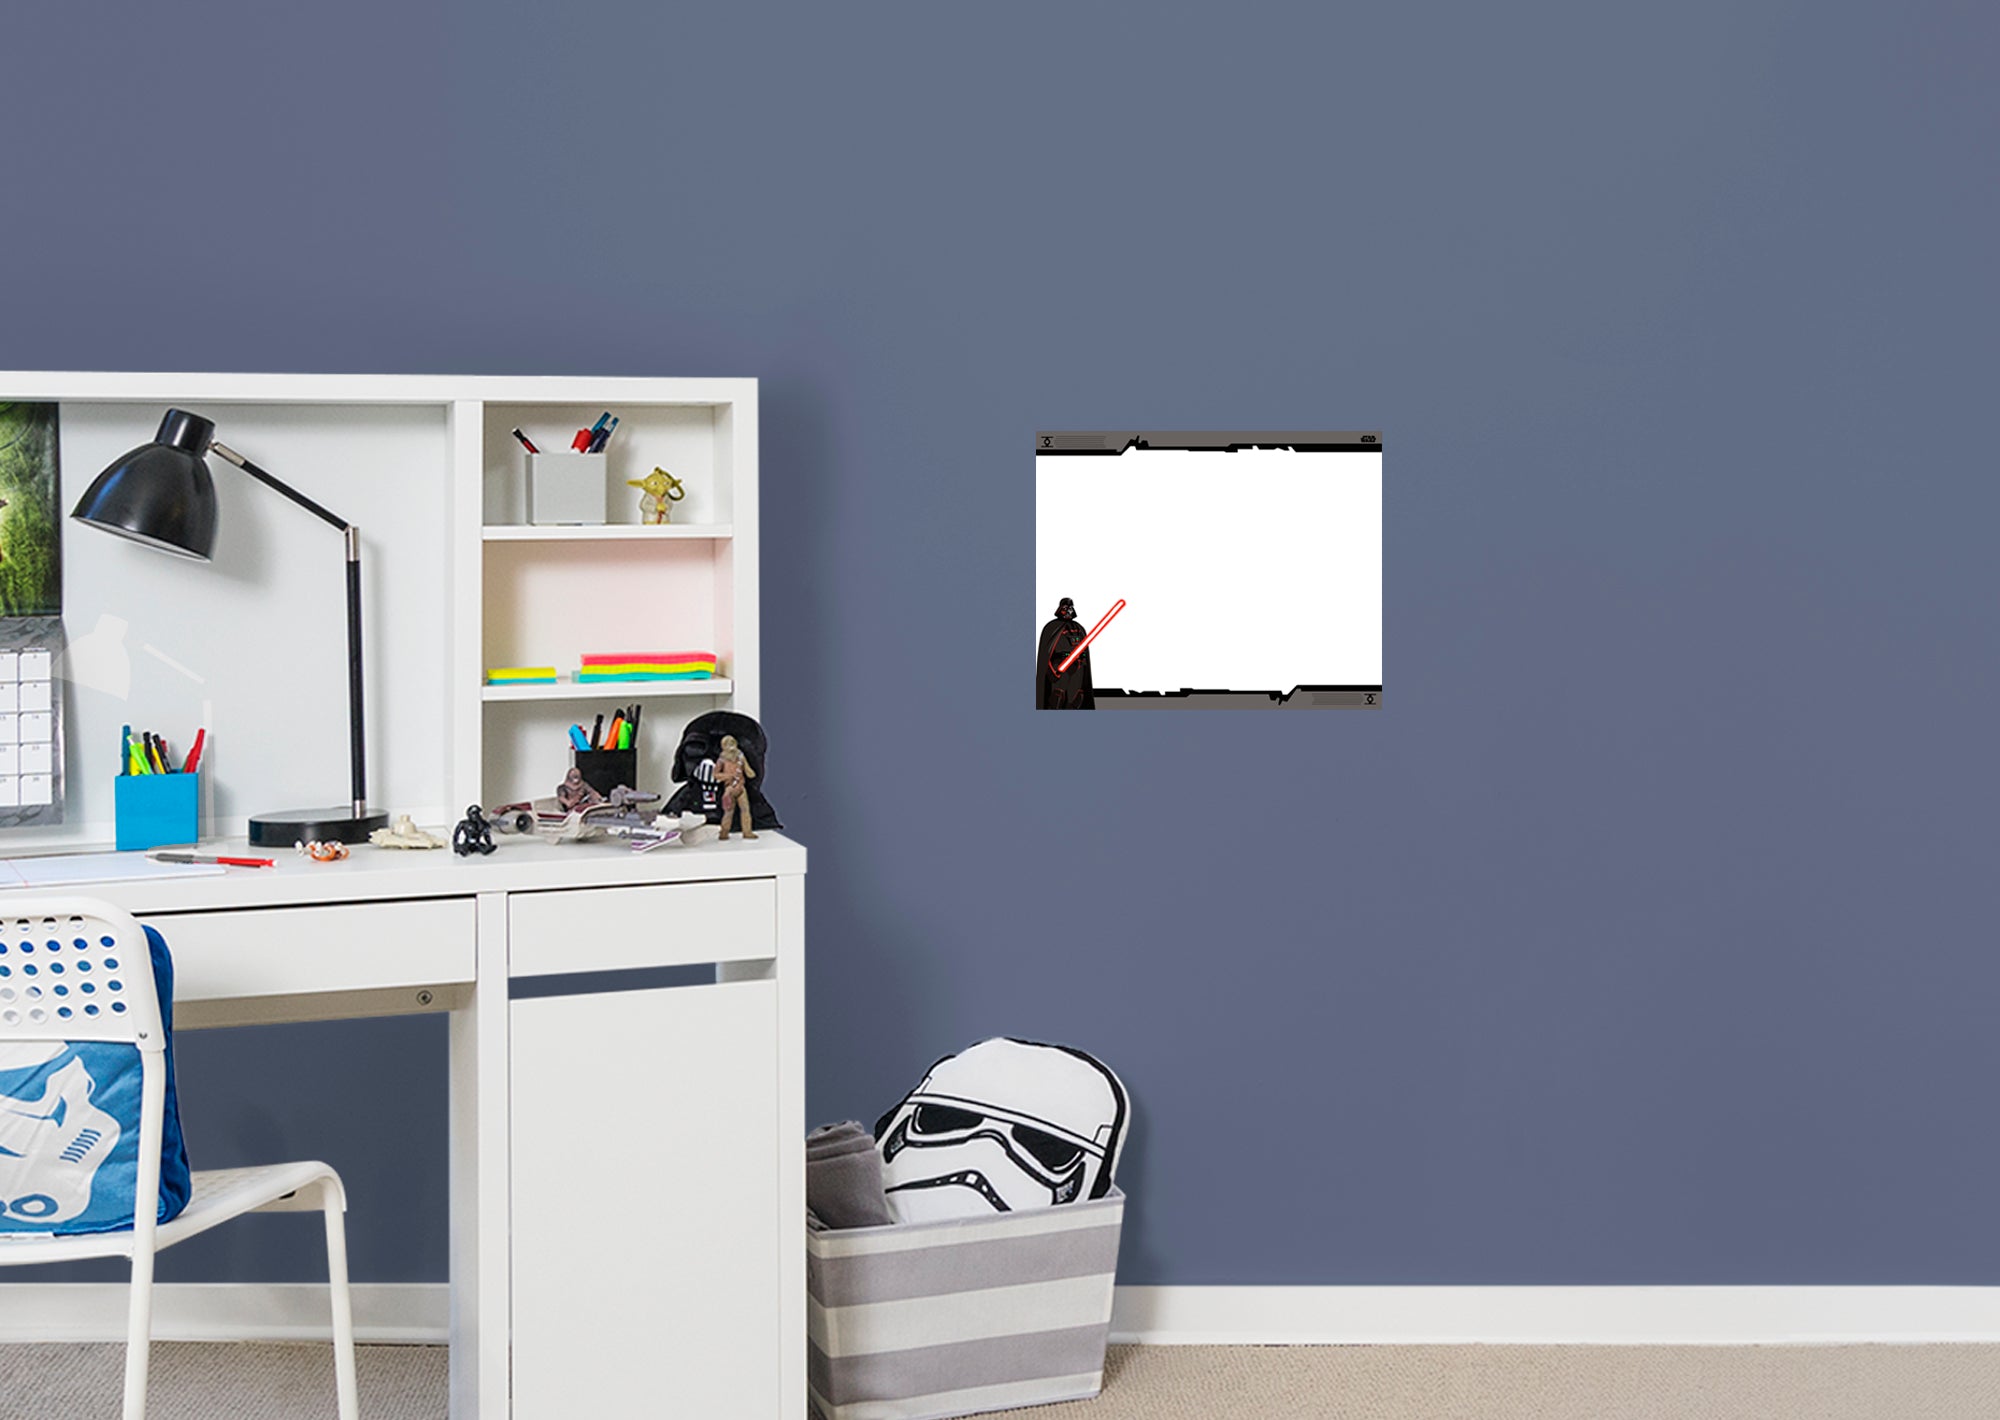 Darth Vader Whiteboard - Officially Licensed Star Wars Removable Wall Decal Large by Fathead | Vinyl